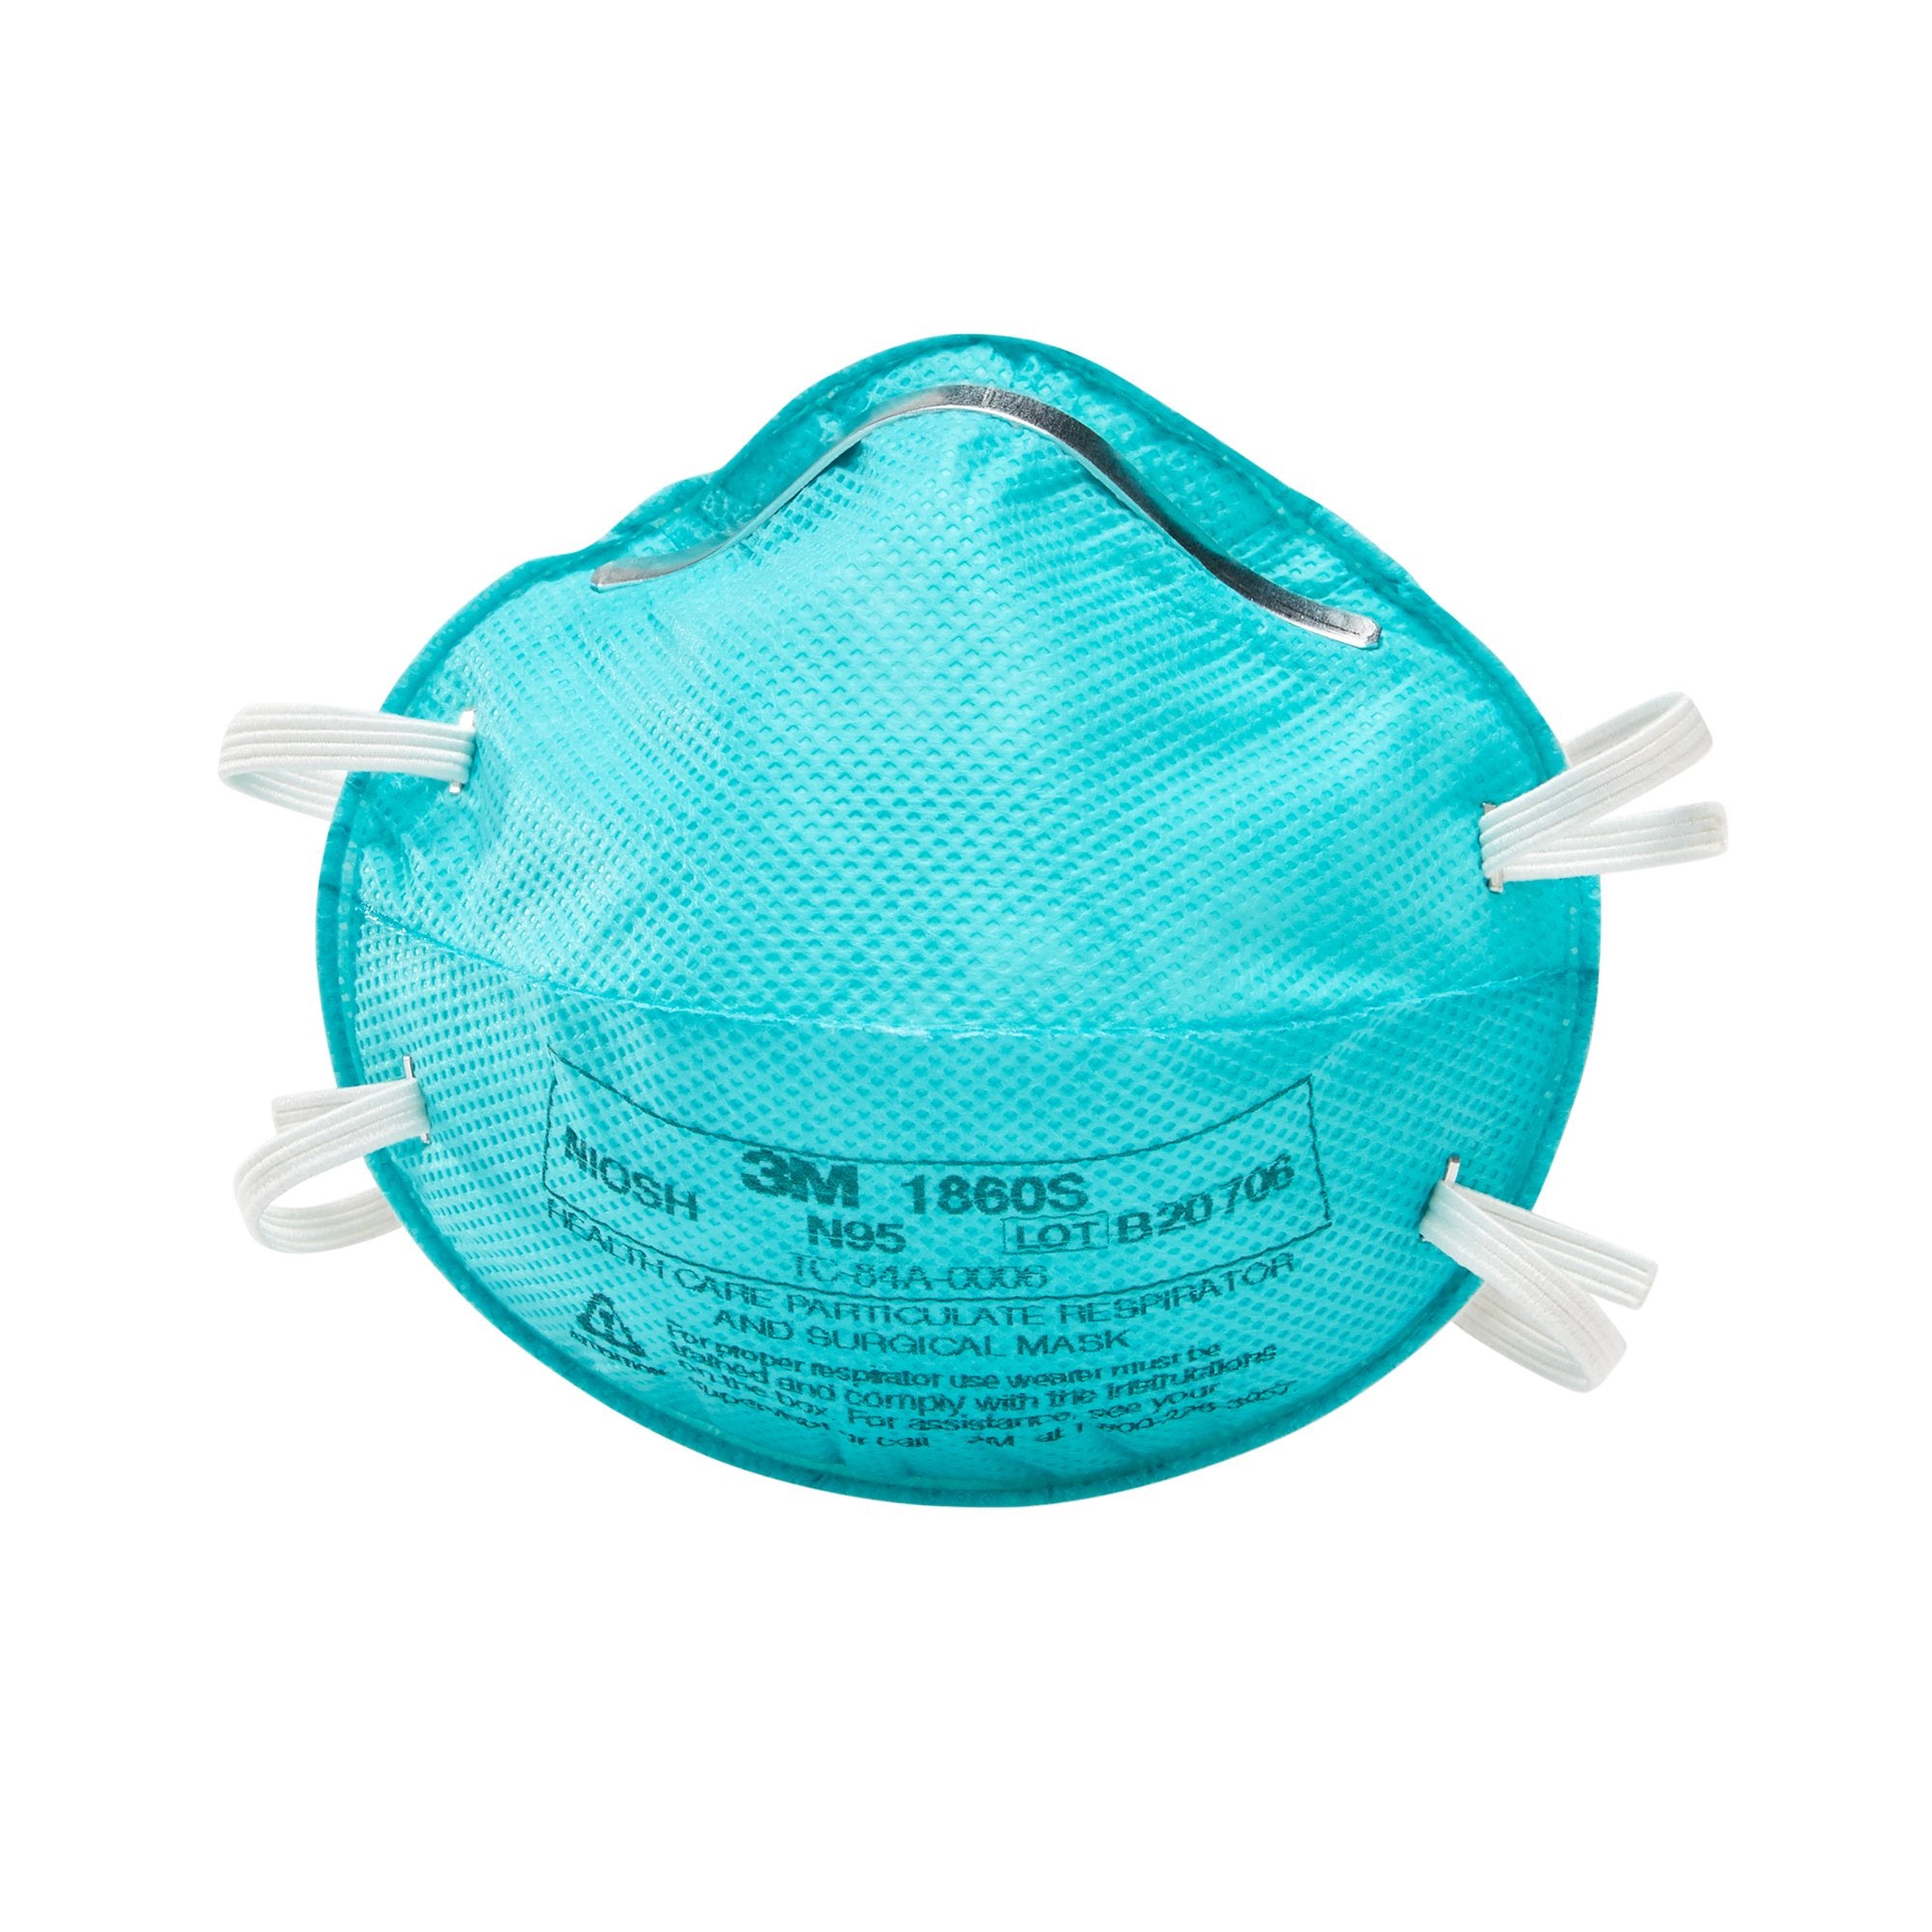 Particulate Respirator / Surgical Mask 3M Medical N95 Cup Elastic Strap Small Blue NonSterile ASTM F1862 Adult